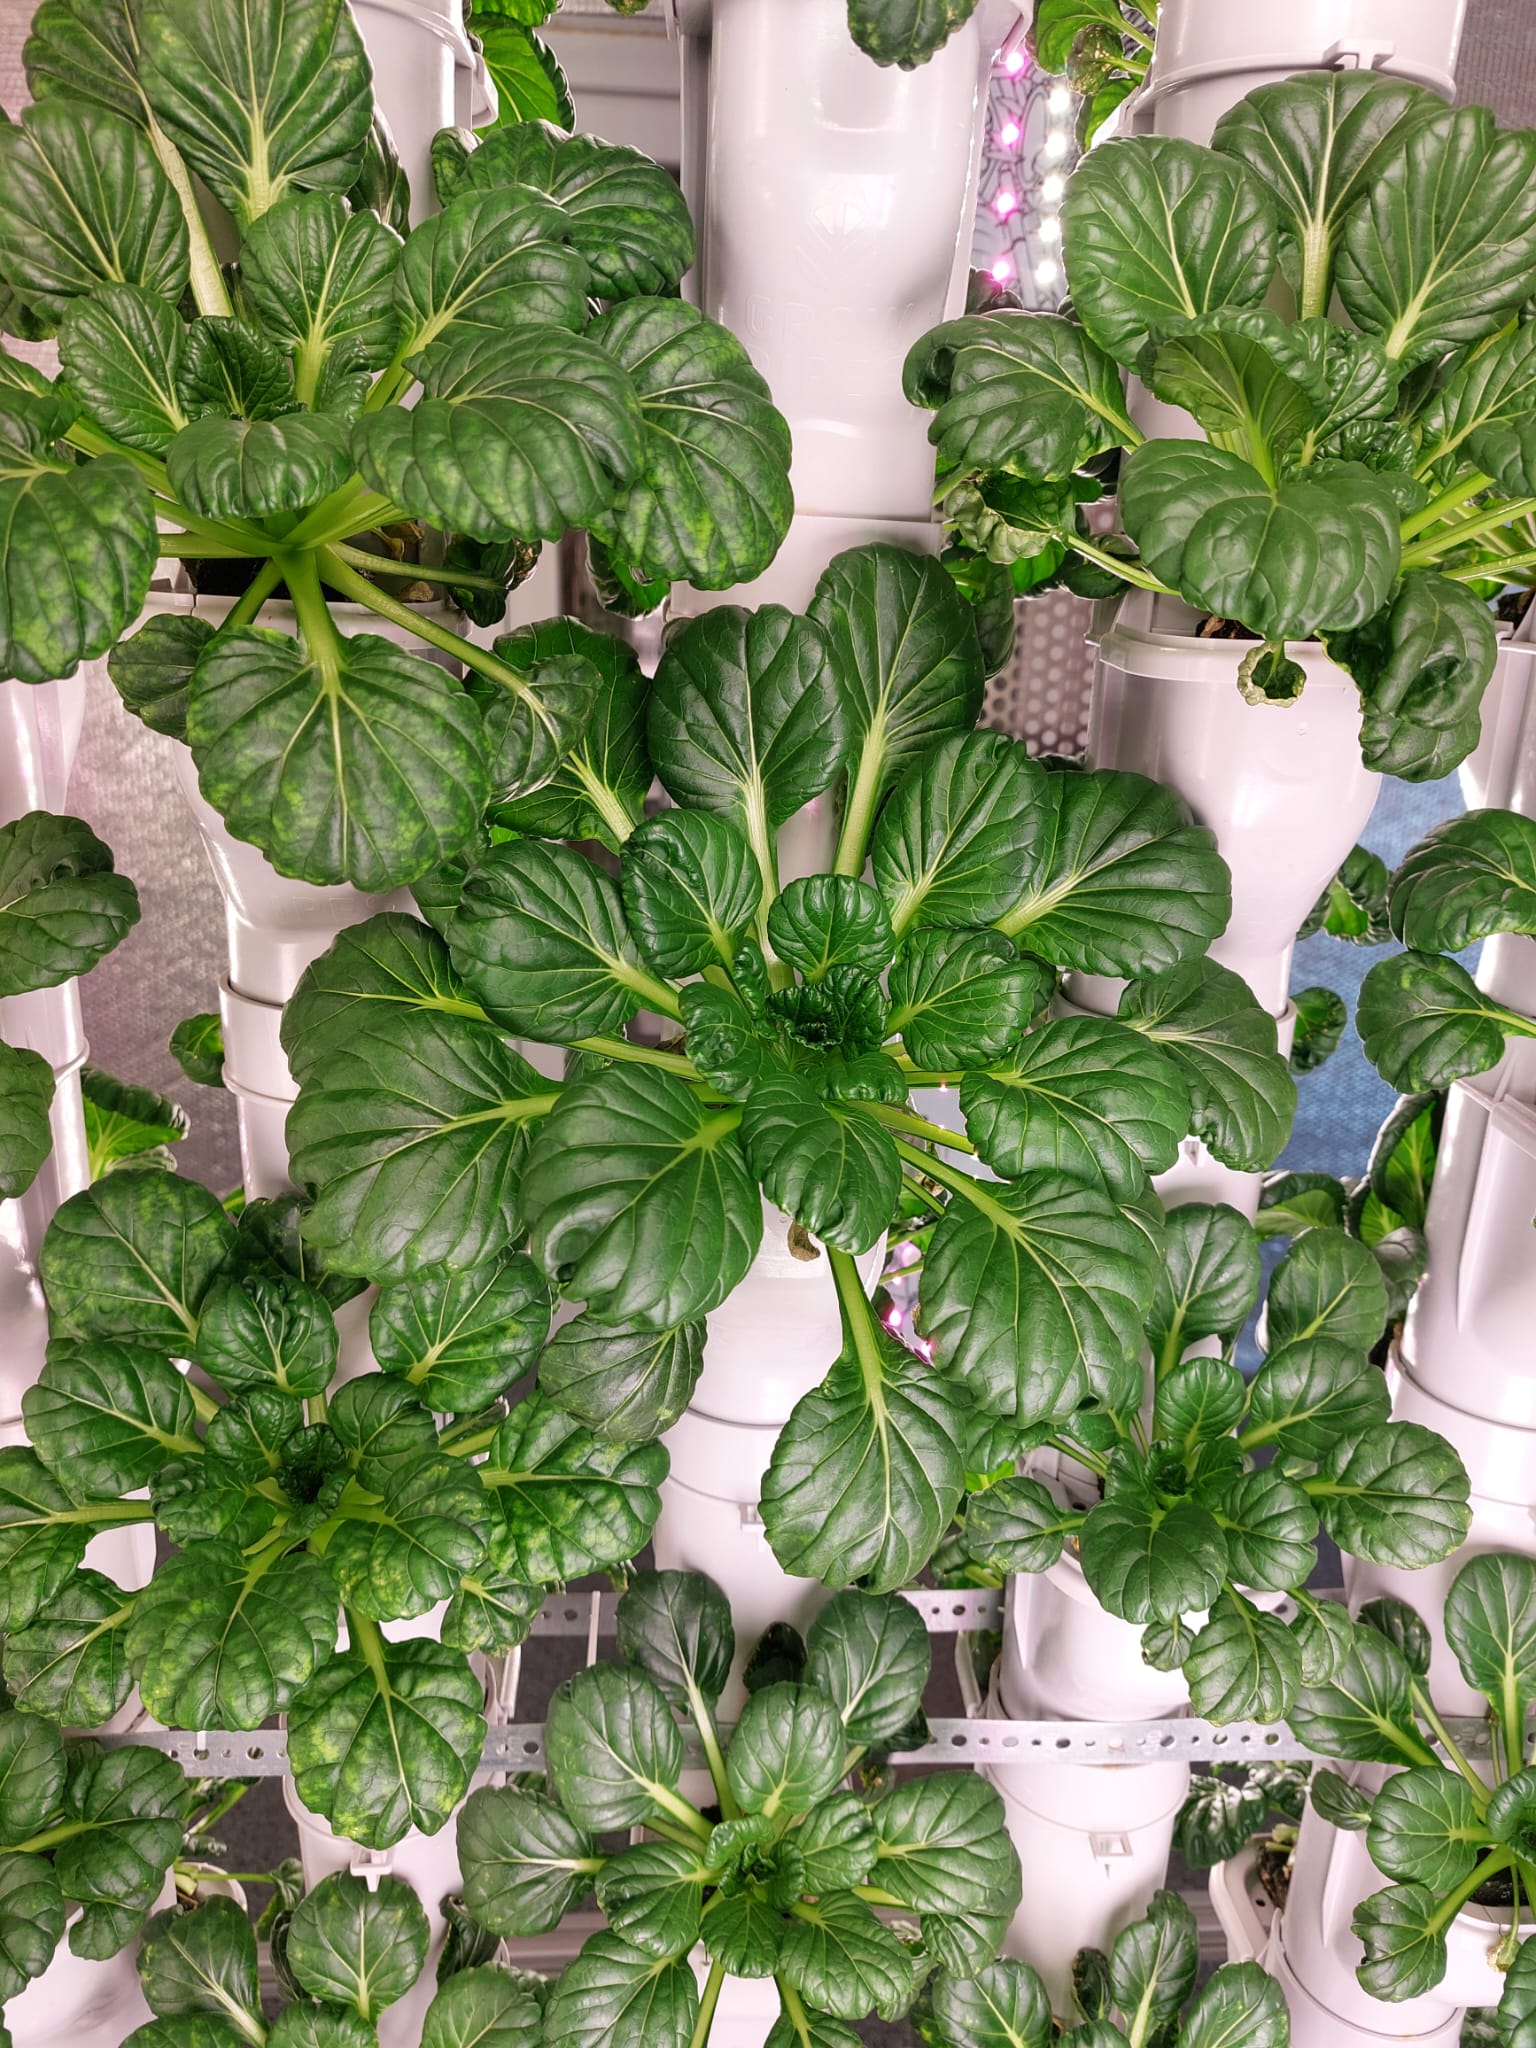 Growpipes vertical farming solution